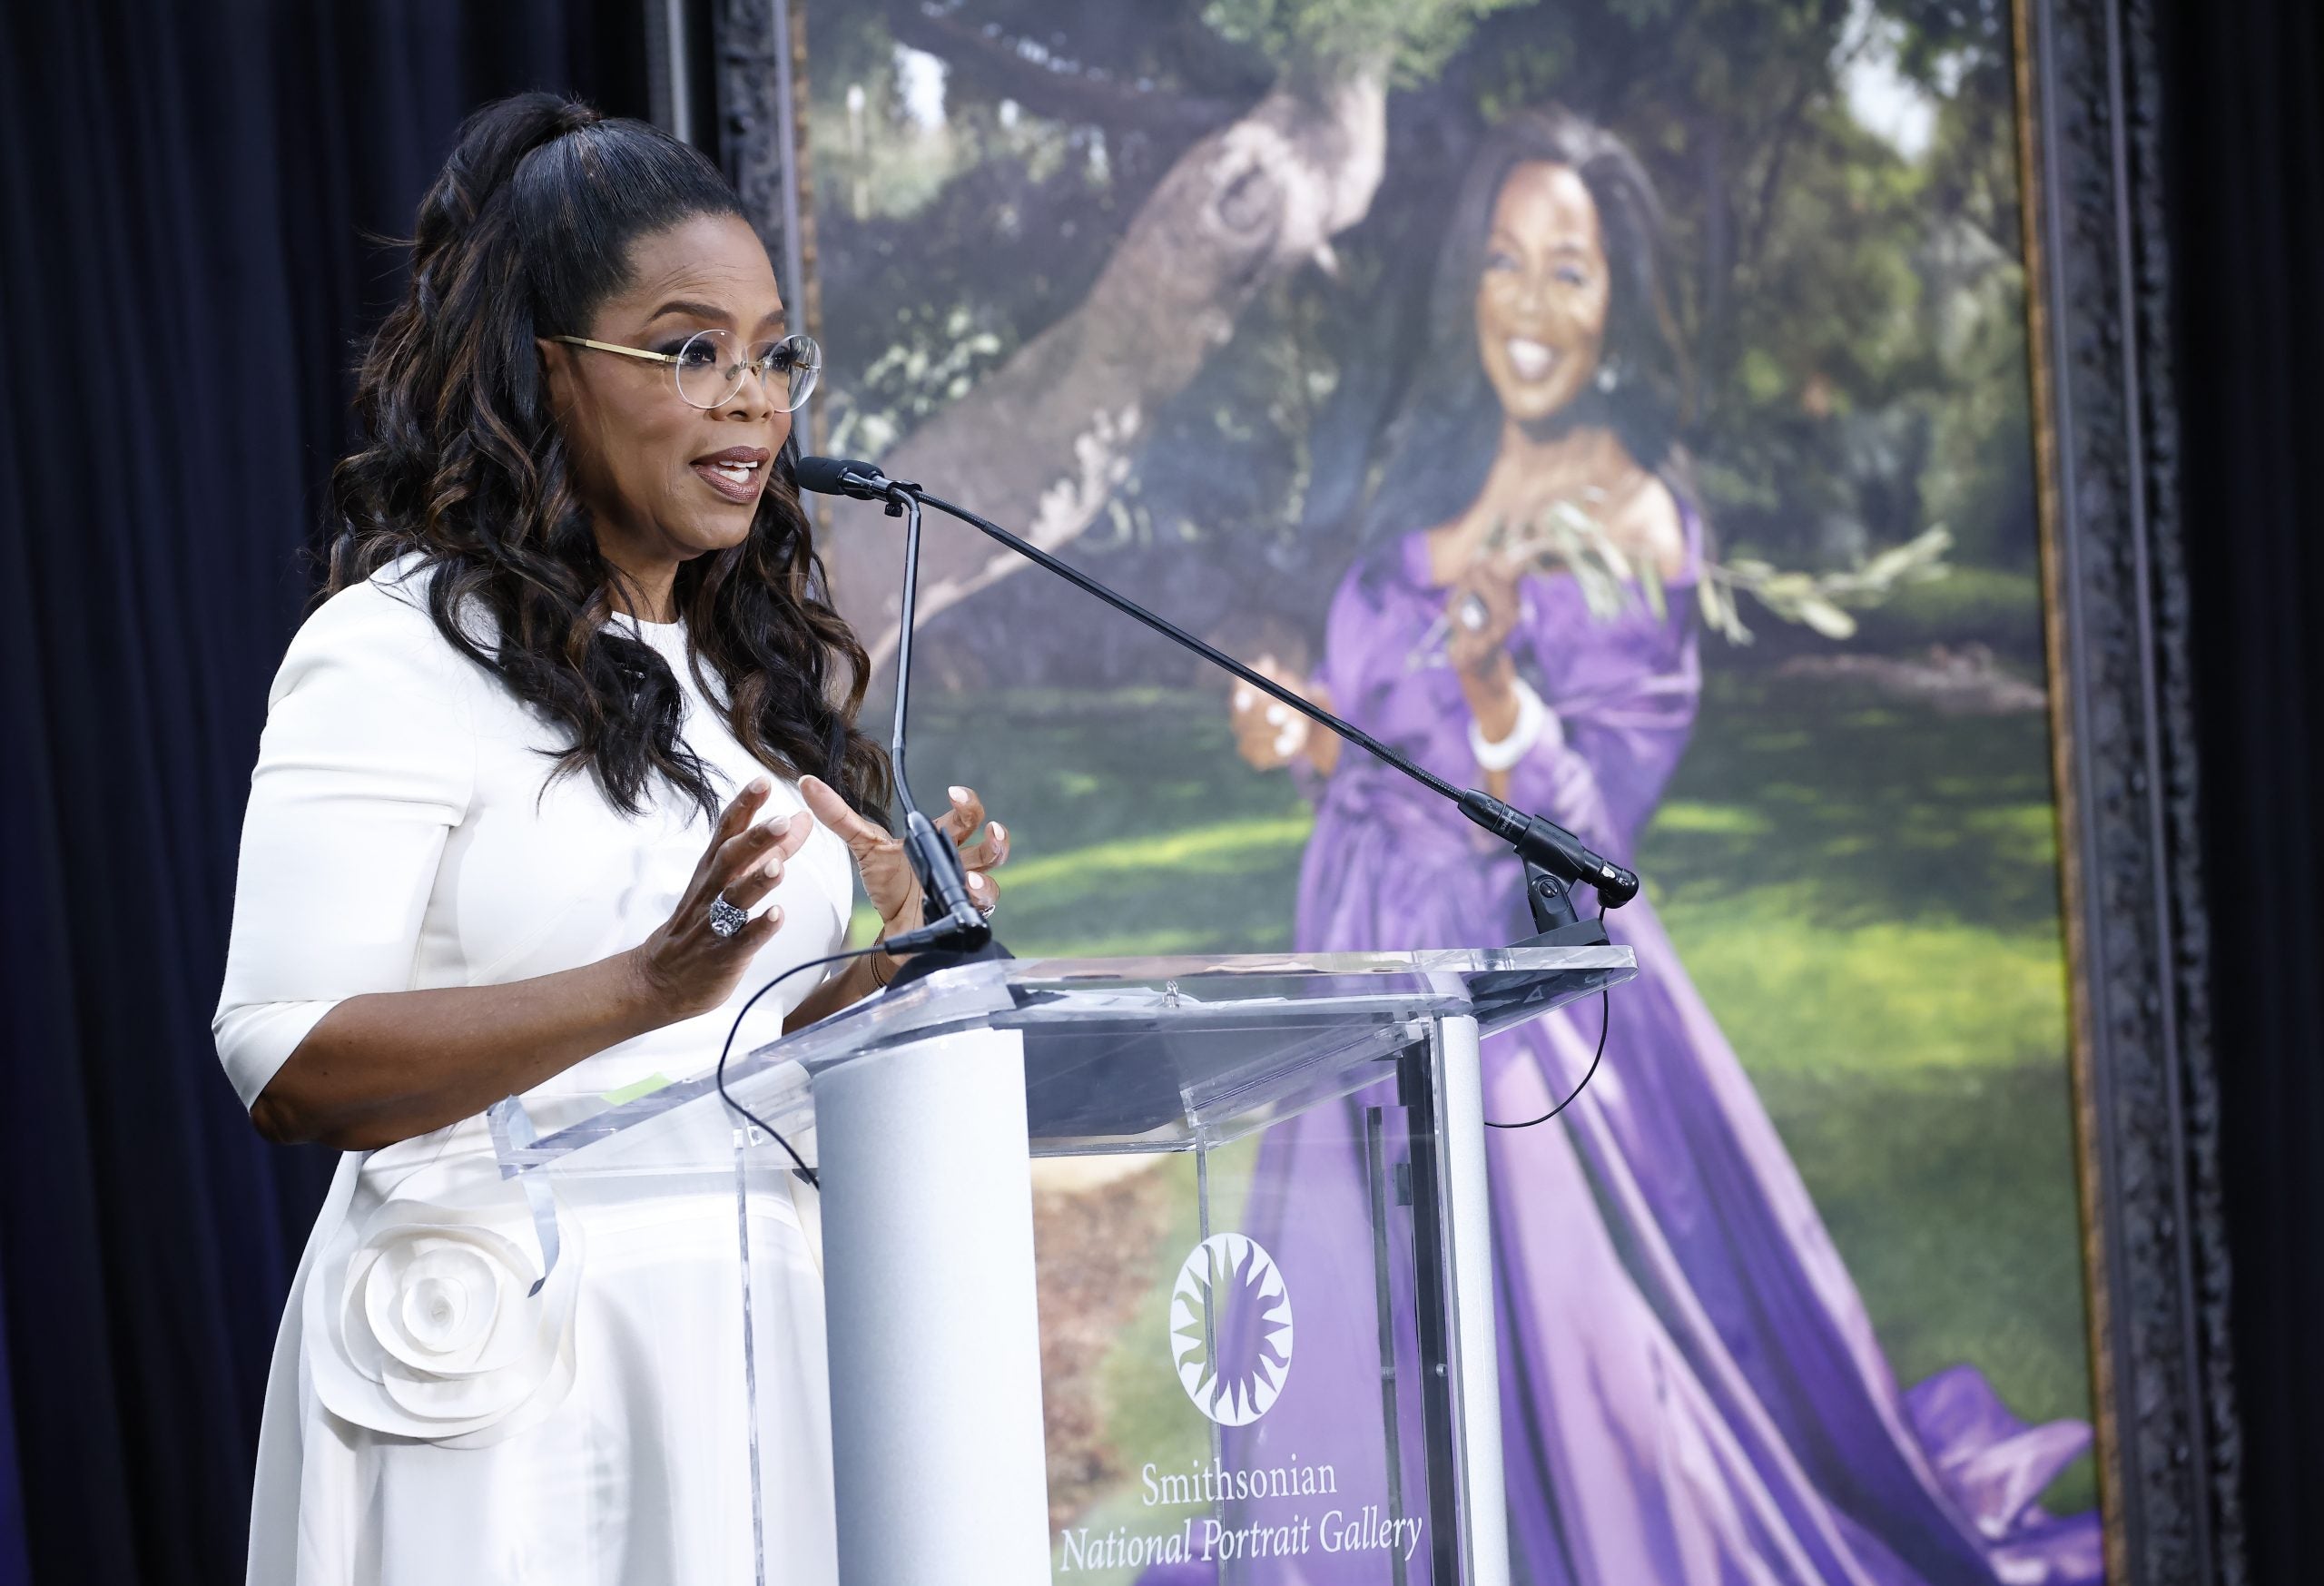 Oprah Winfrey Portrait Unveiled At The Smithsonian's National Portrait  Gallery